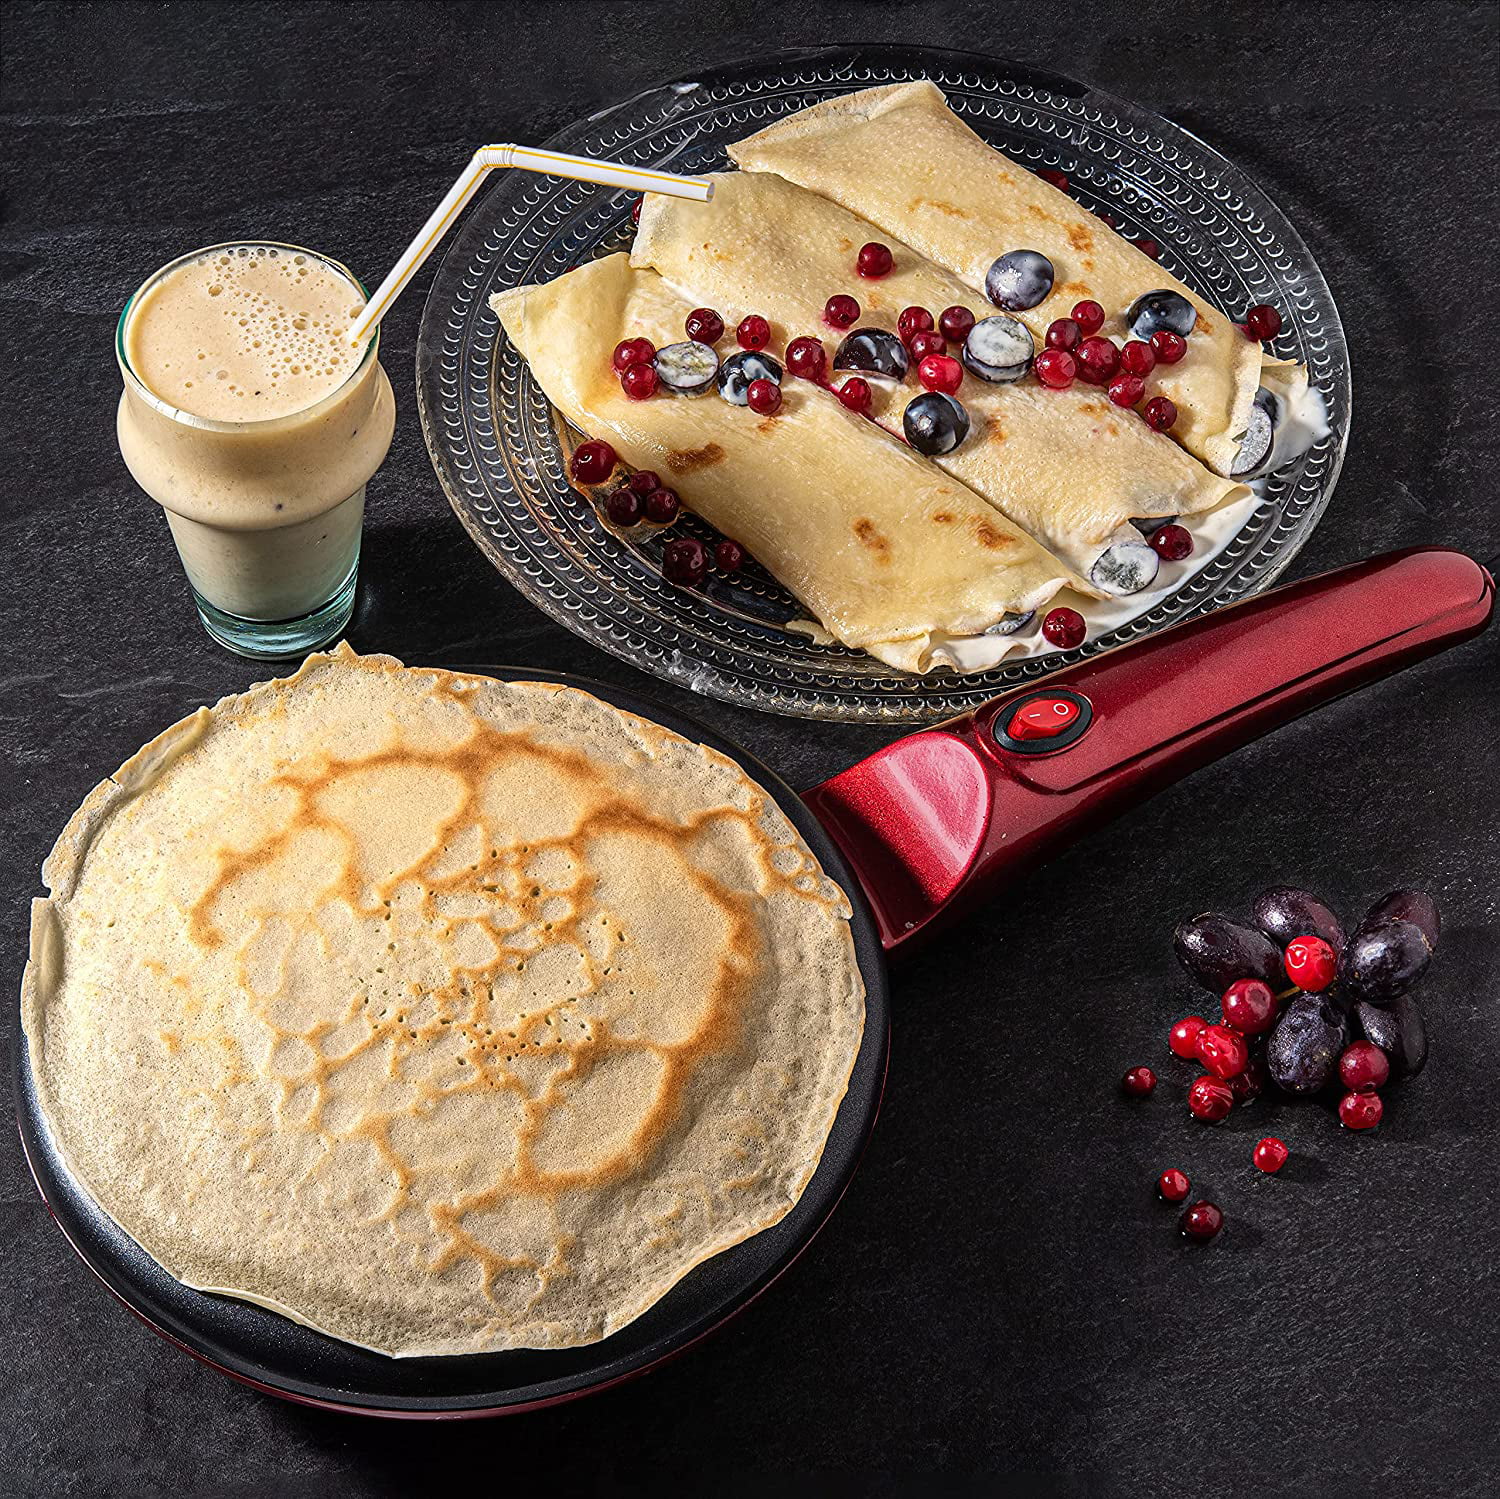 Moss & Stone Electric Crepe Maker With Auto Power Off, Portable Crepe Maker  & Non-Stick Dipping Plate, On/Off Switch, Nonstick Coating & Automatic